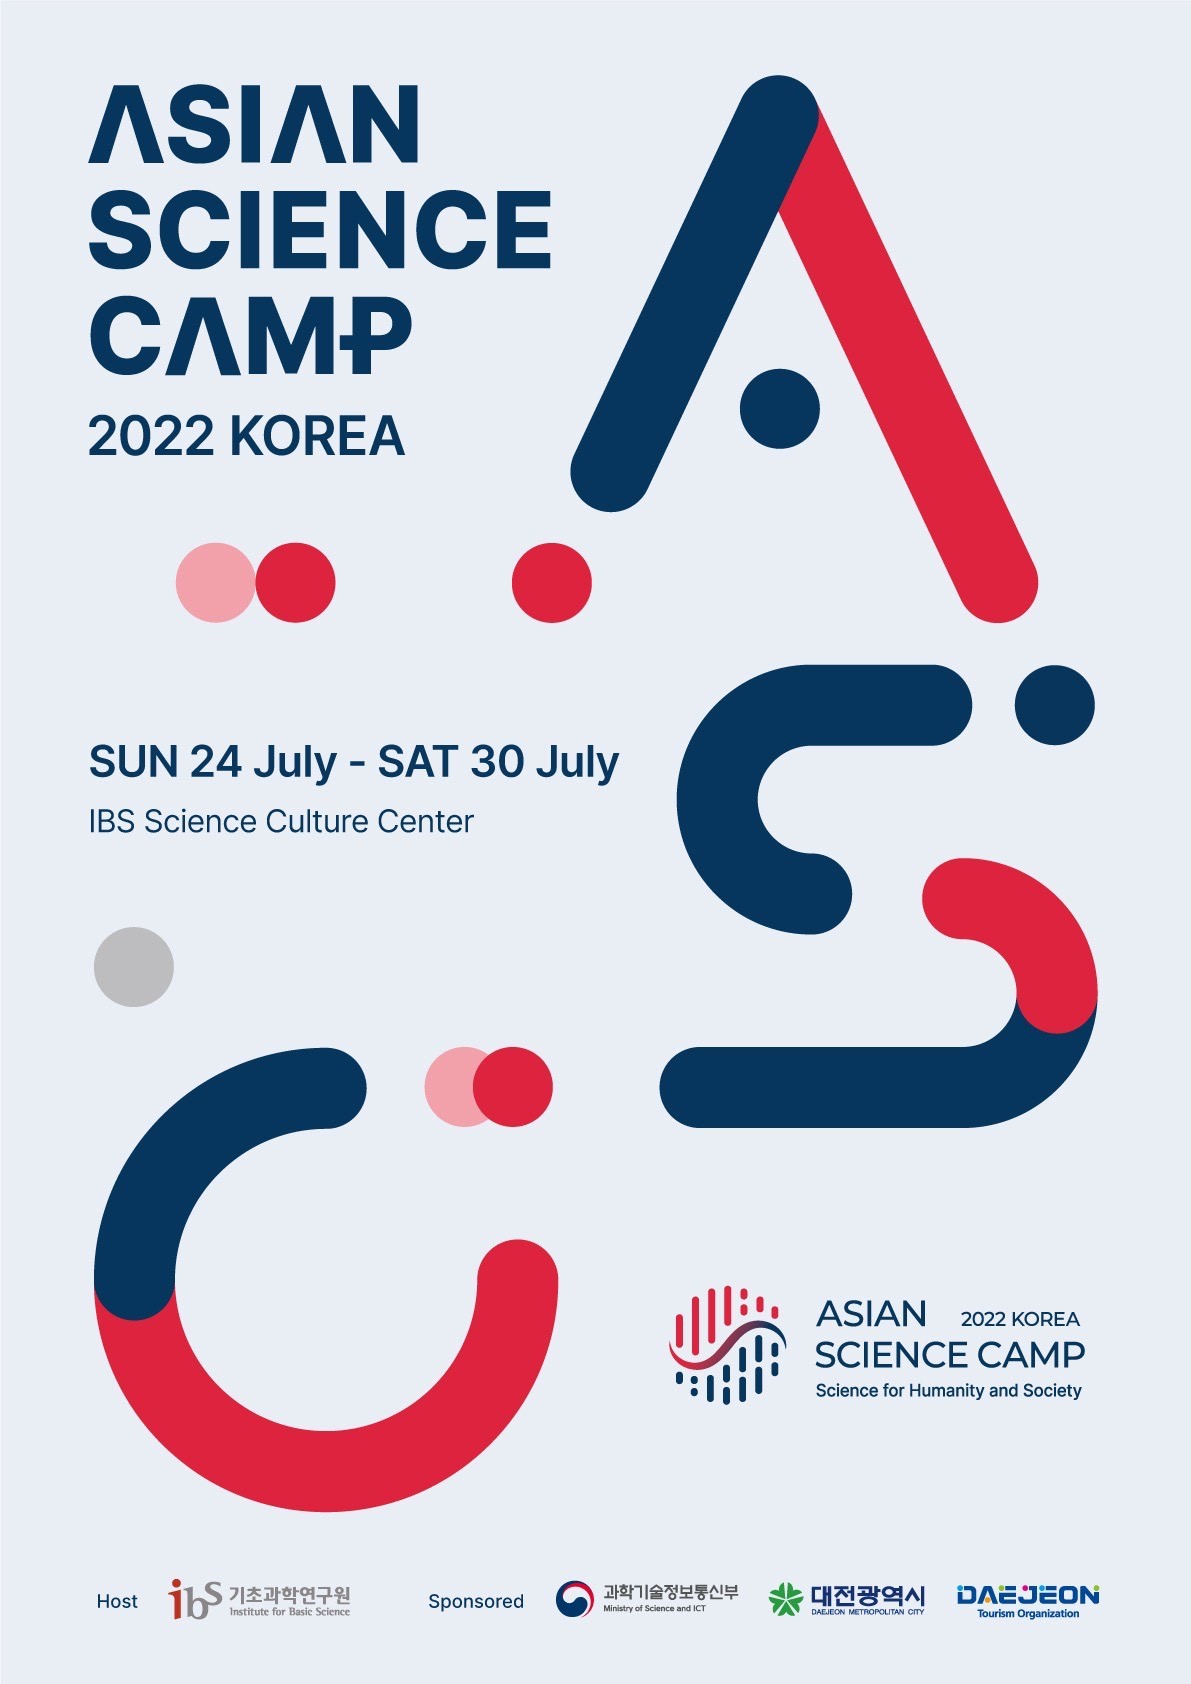 Asian Science Camp 2022